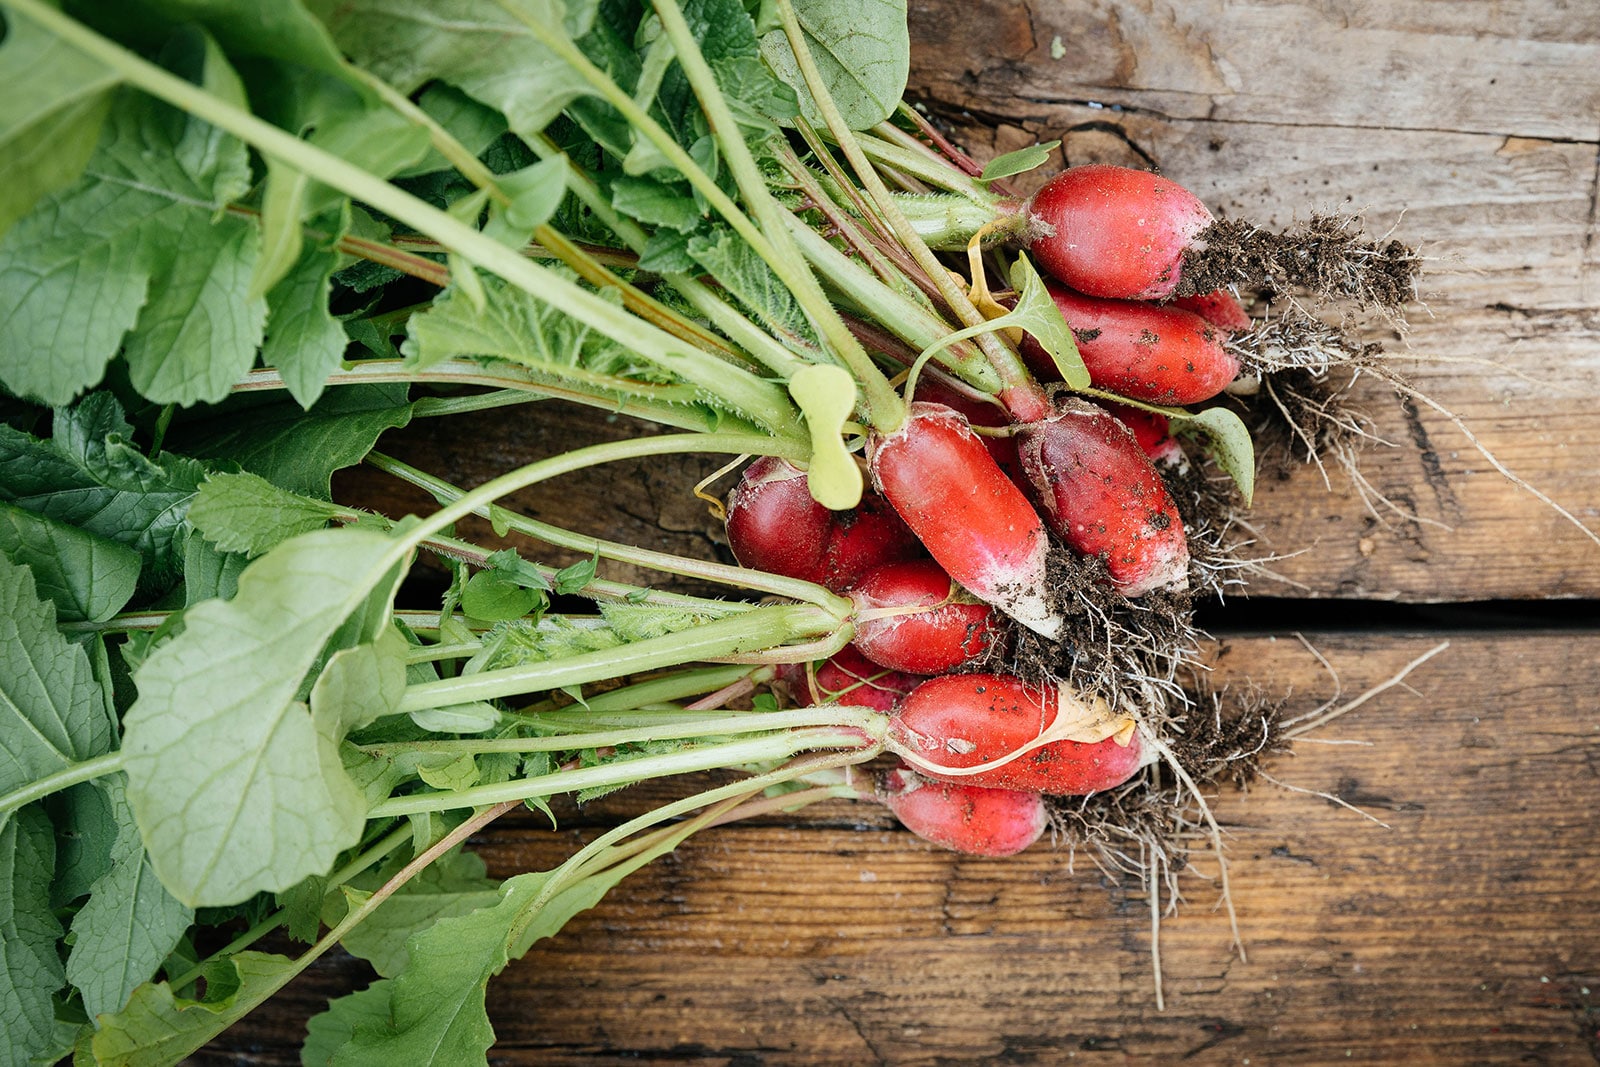 Bundle of French breakfast radishes on a rustic wooden surface